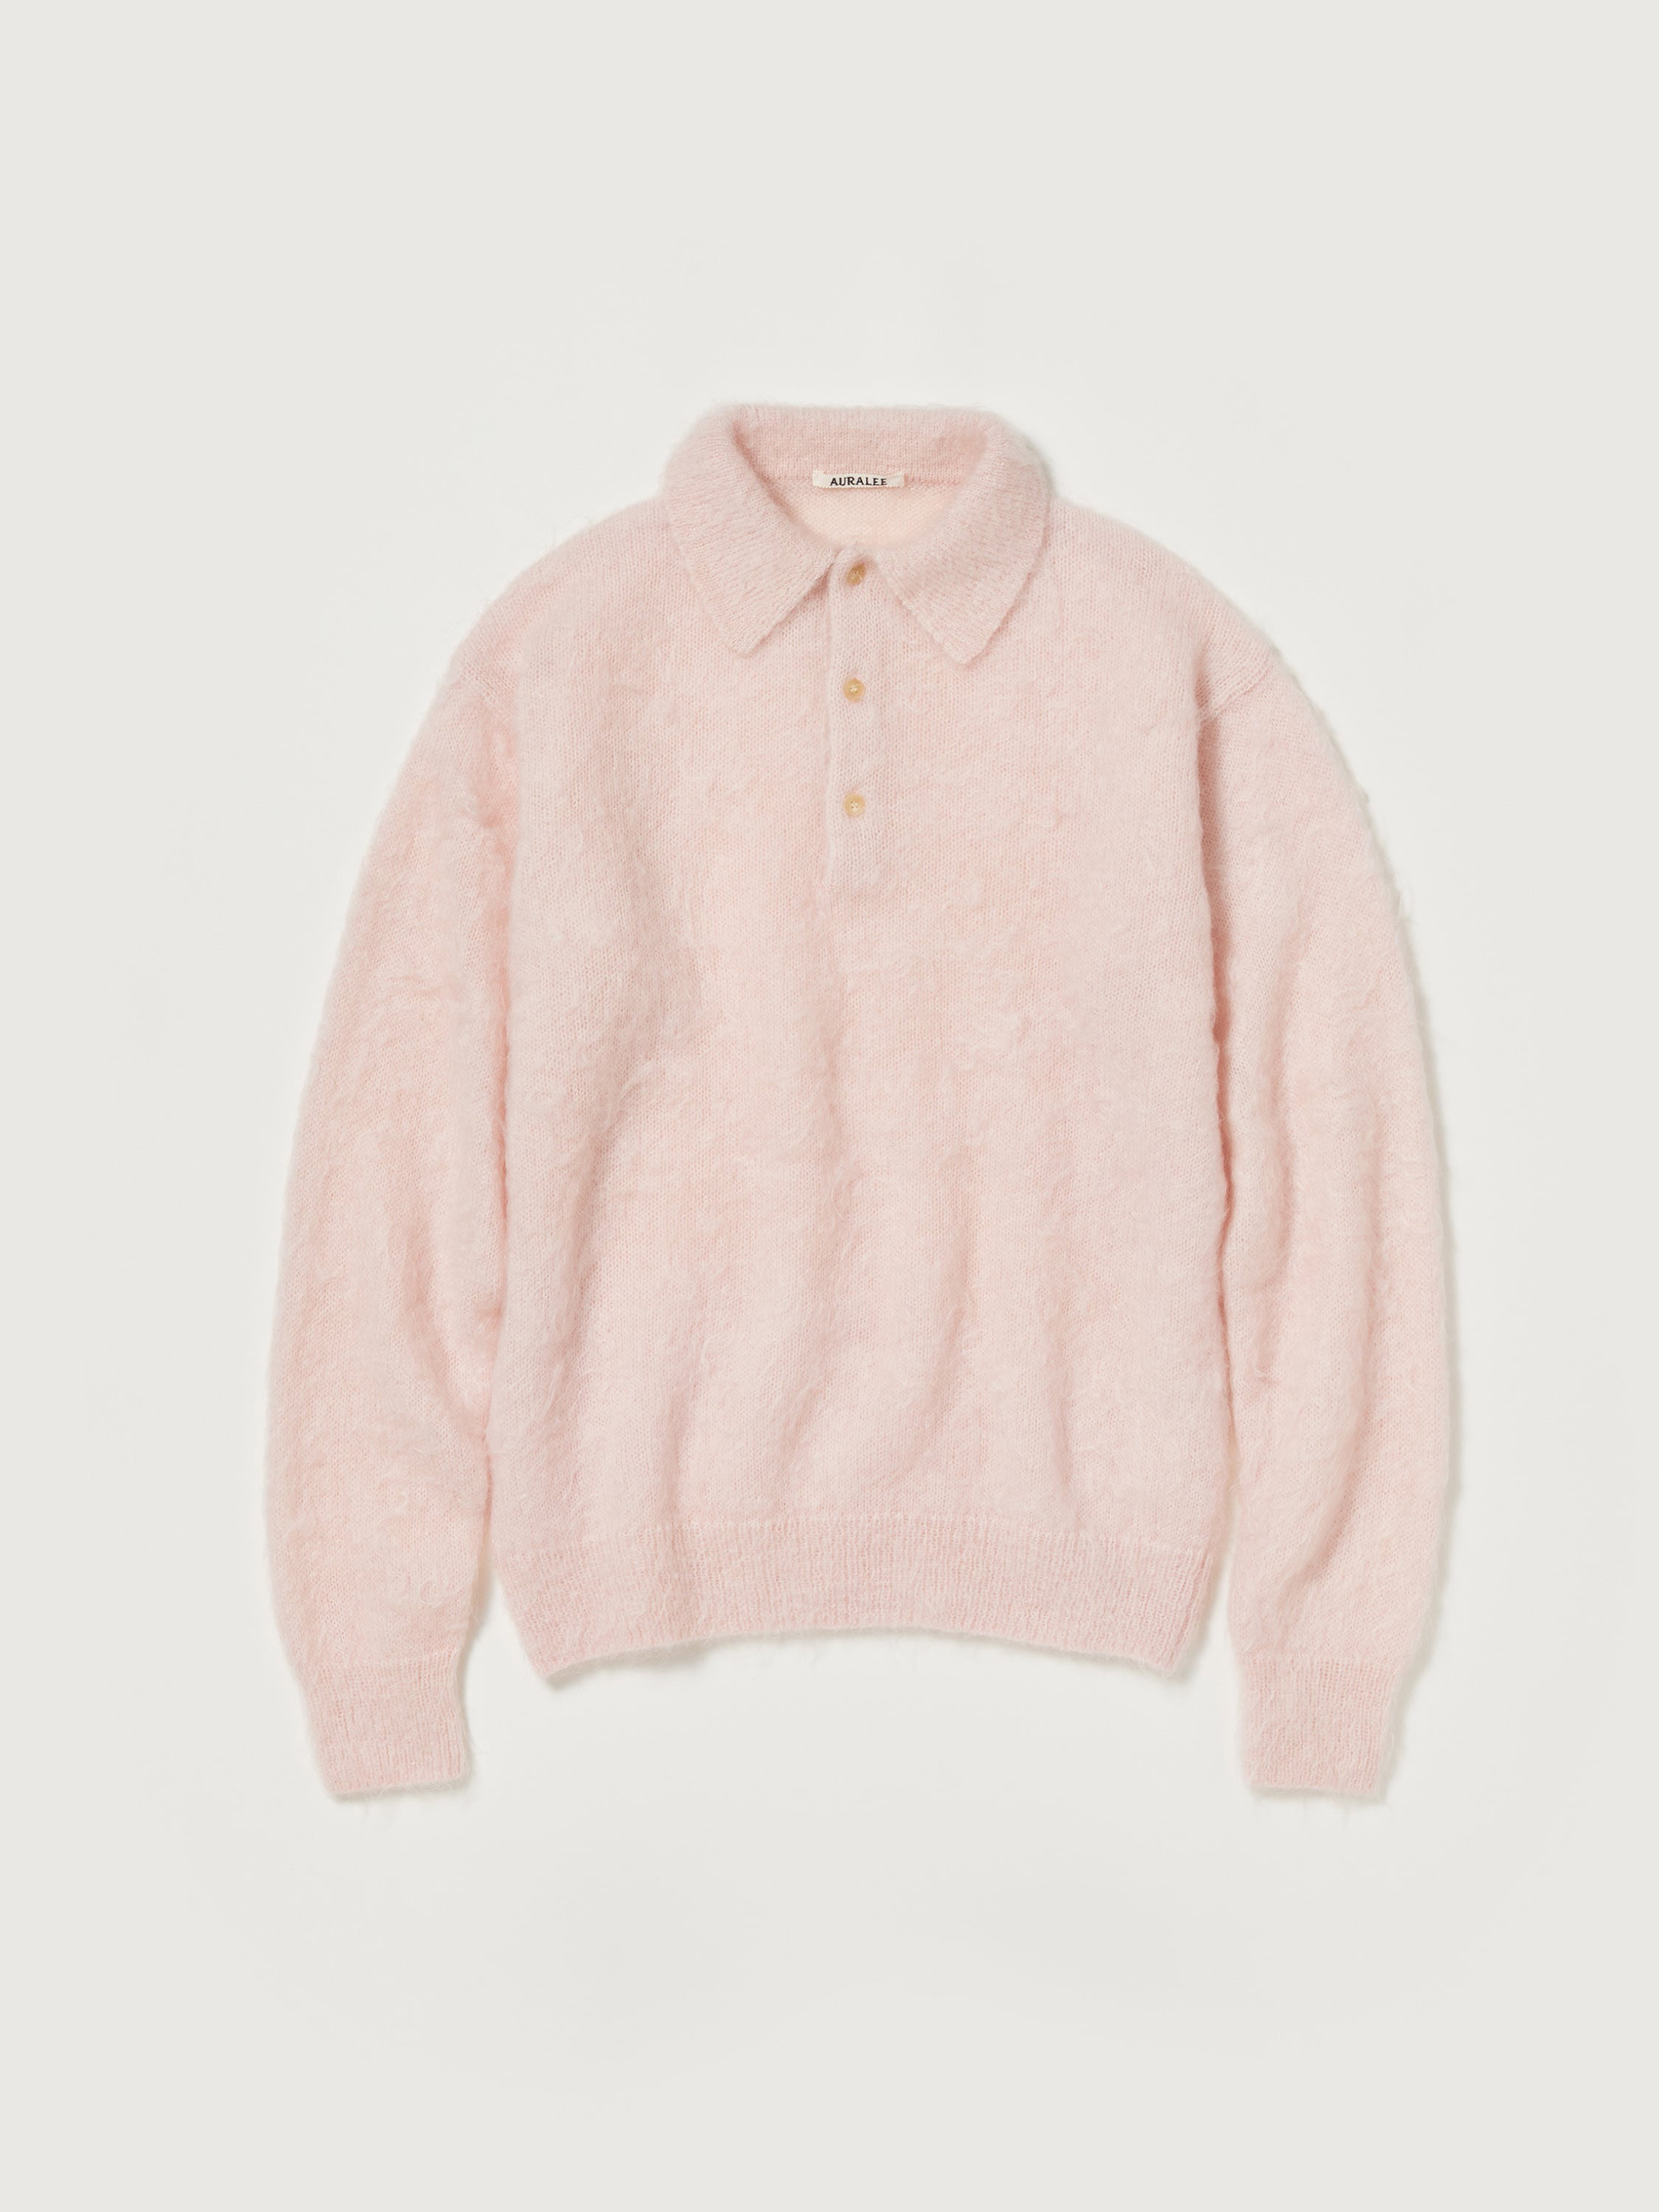 BRUSHED SUPER KID MOHAIR KNIT POLO 詳細画像 LIGHT PINK 1